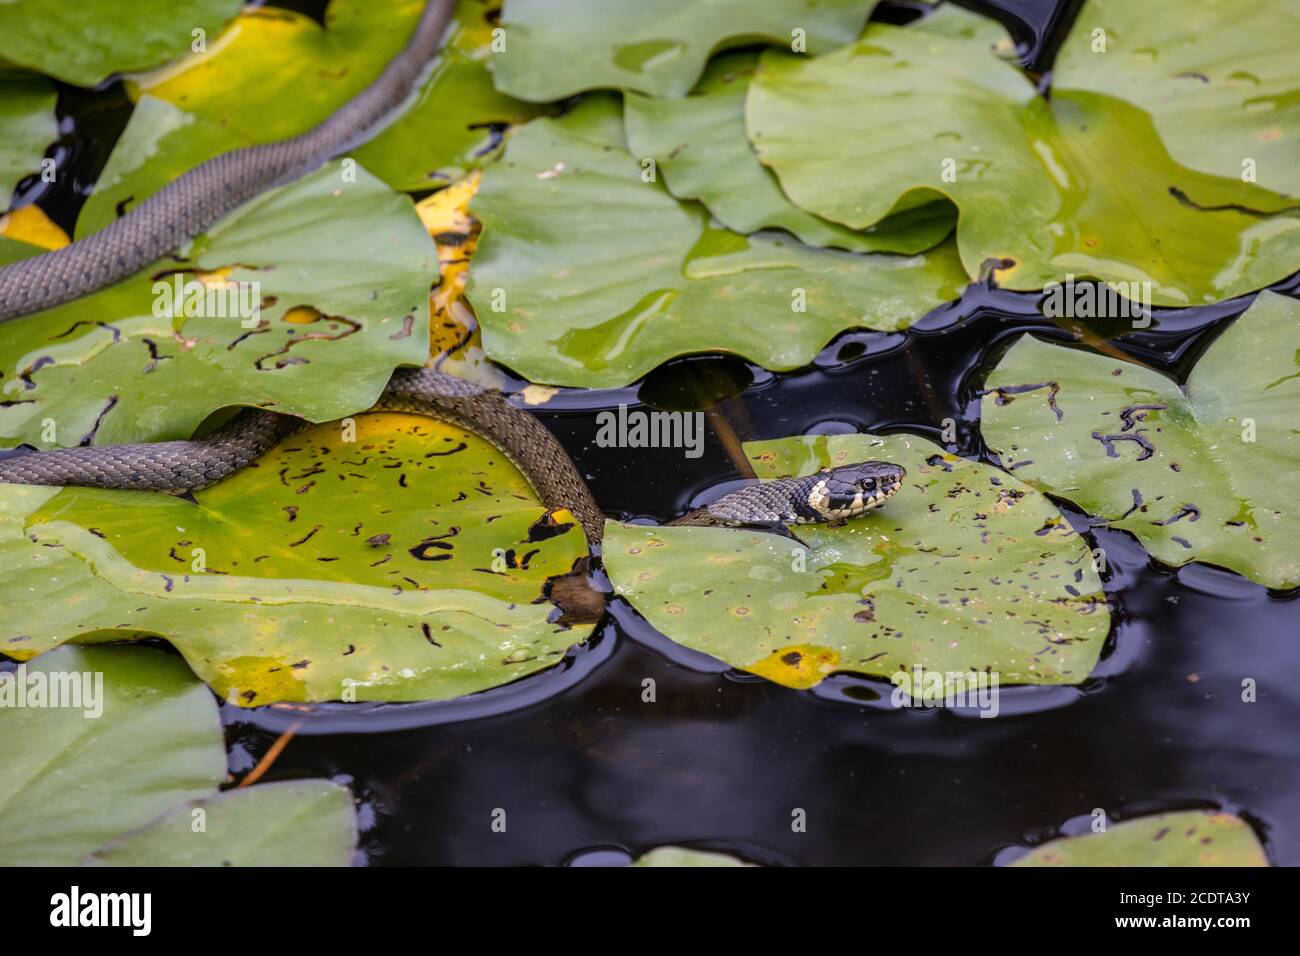 Hunting grass snake lurks between water lily leaves for a prey Stock Photo